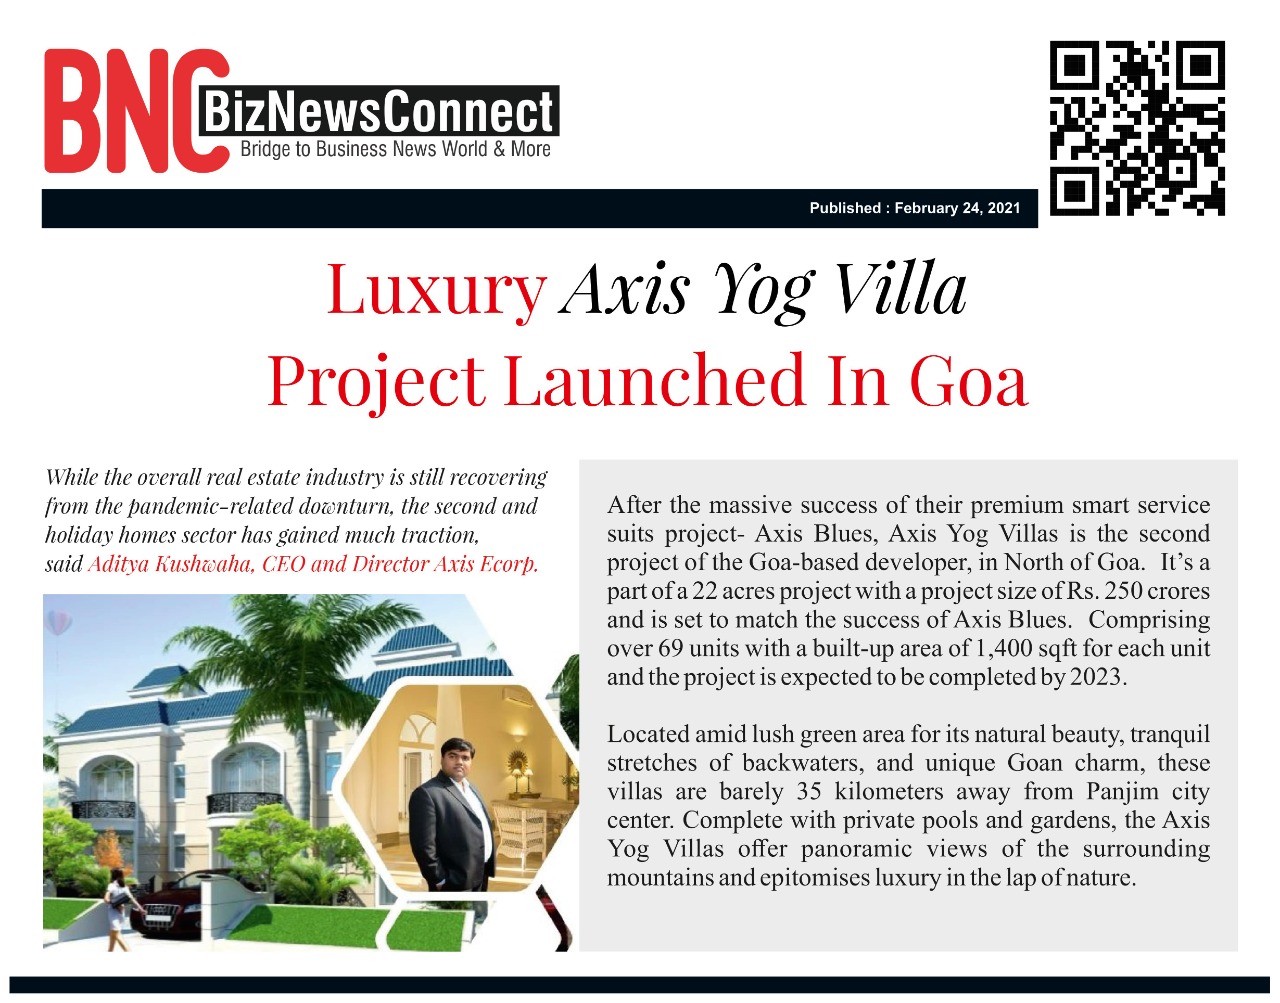 Luxury Axis Yog Villa Project Launched In Goa